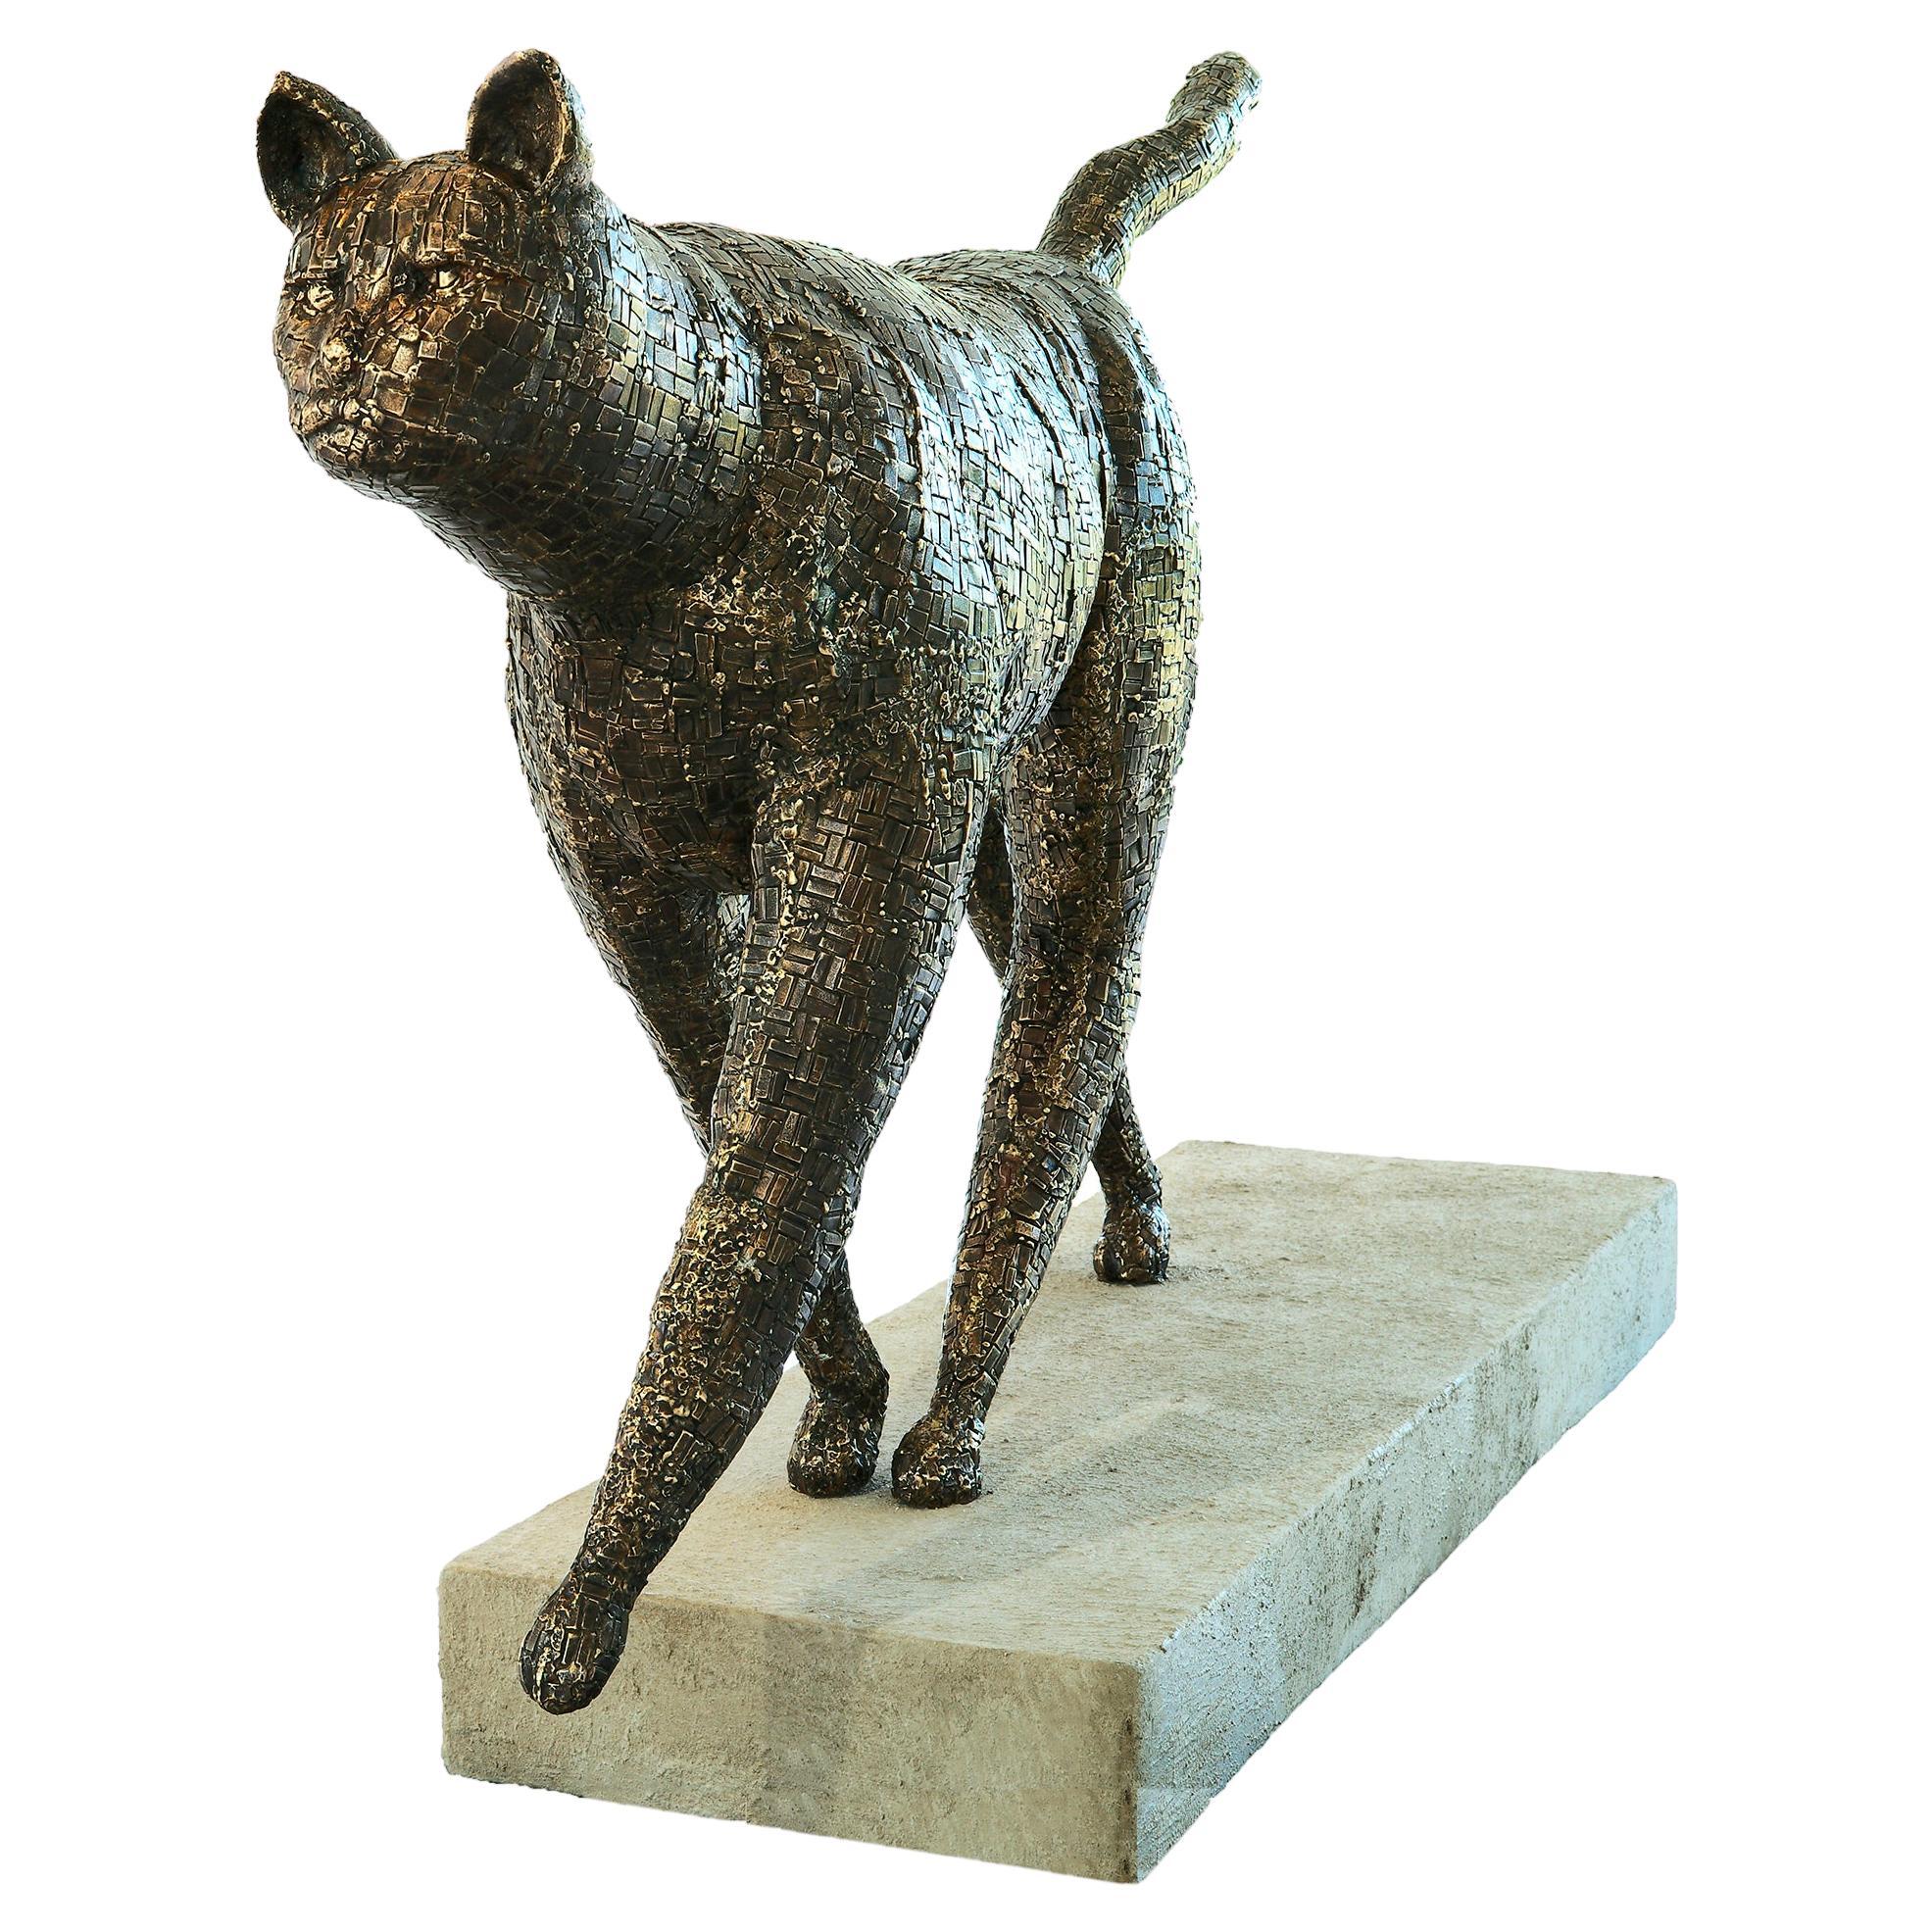 Walking Cat - Lion Sized Bronze Cat Sculpture with Mosaic Patterned Surface For Sale